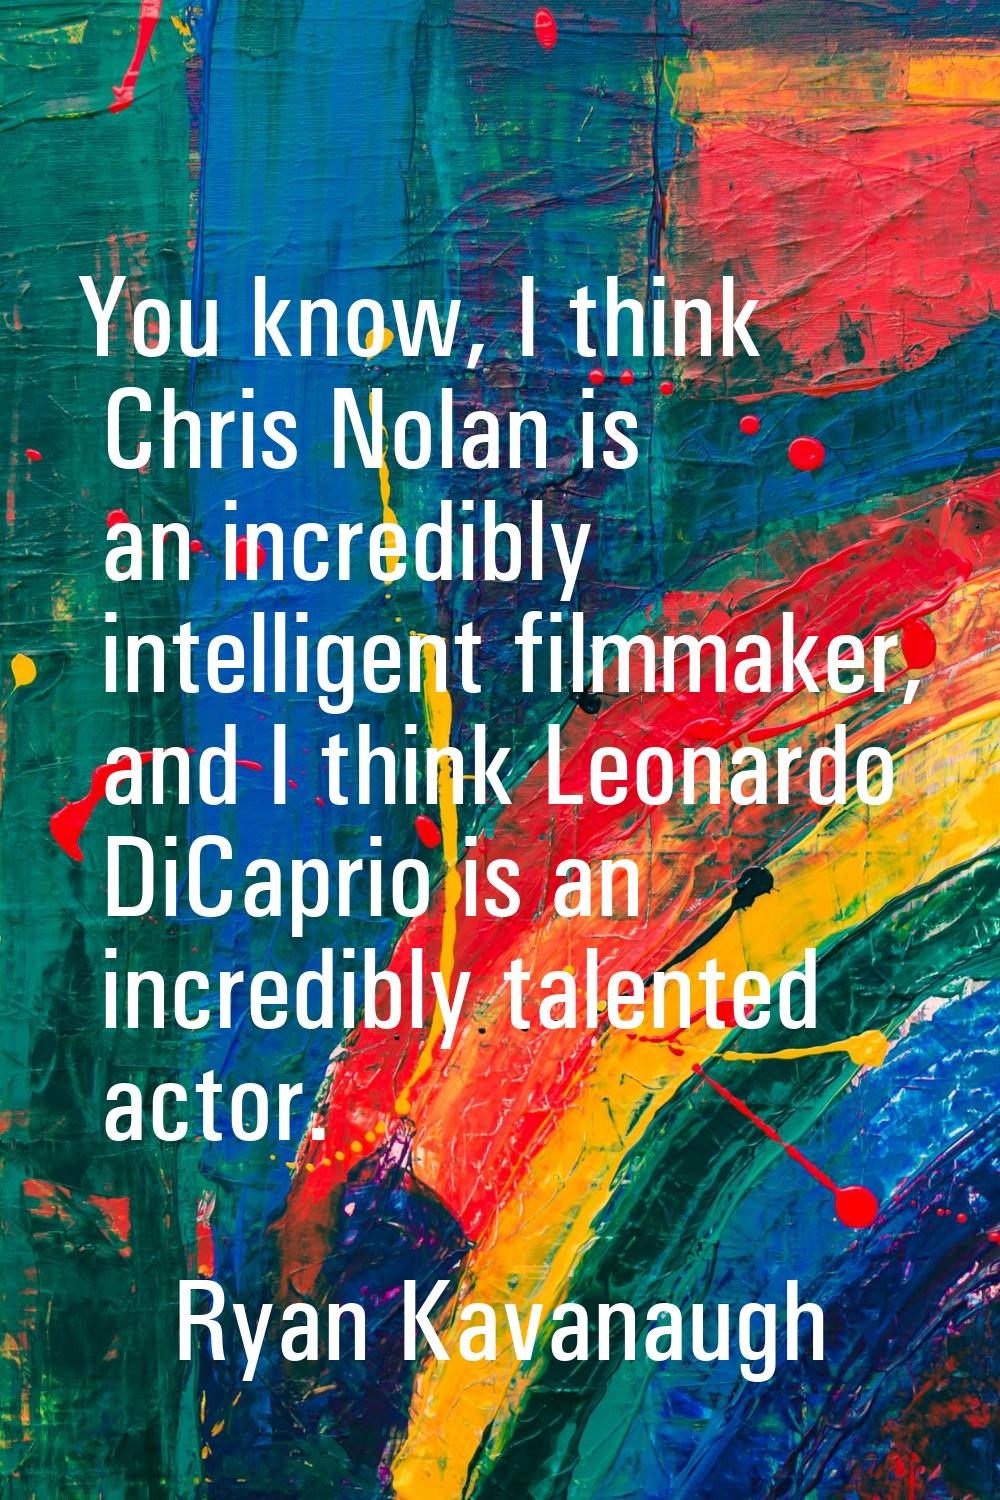 You know, I think Chris Nolan is an incredibly intelligent filmmaker, and I think Leonardo DiCaprio